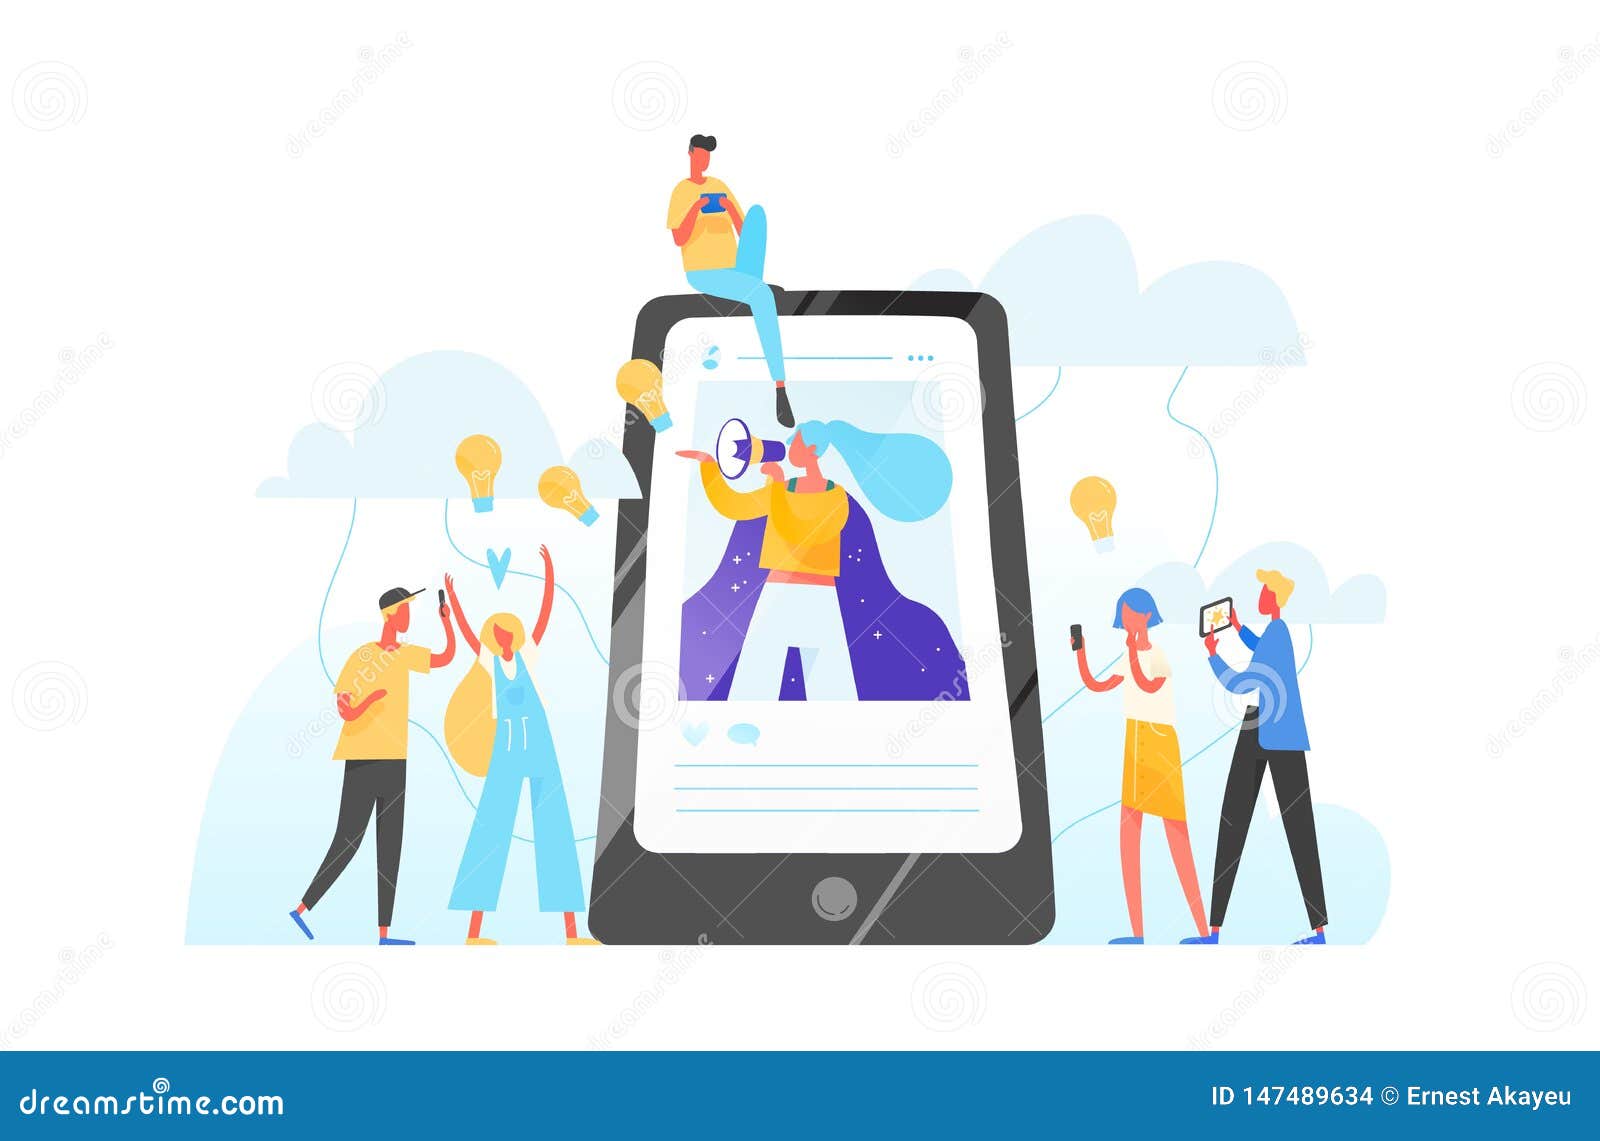 mobile phone, woman with megaphone on screen and young people surrounding her. influencer marketing, social media or